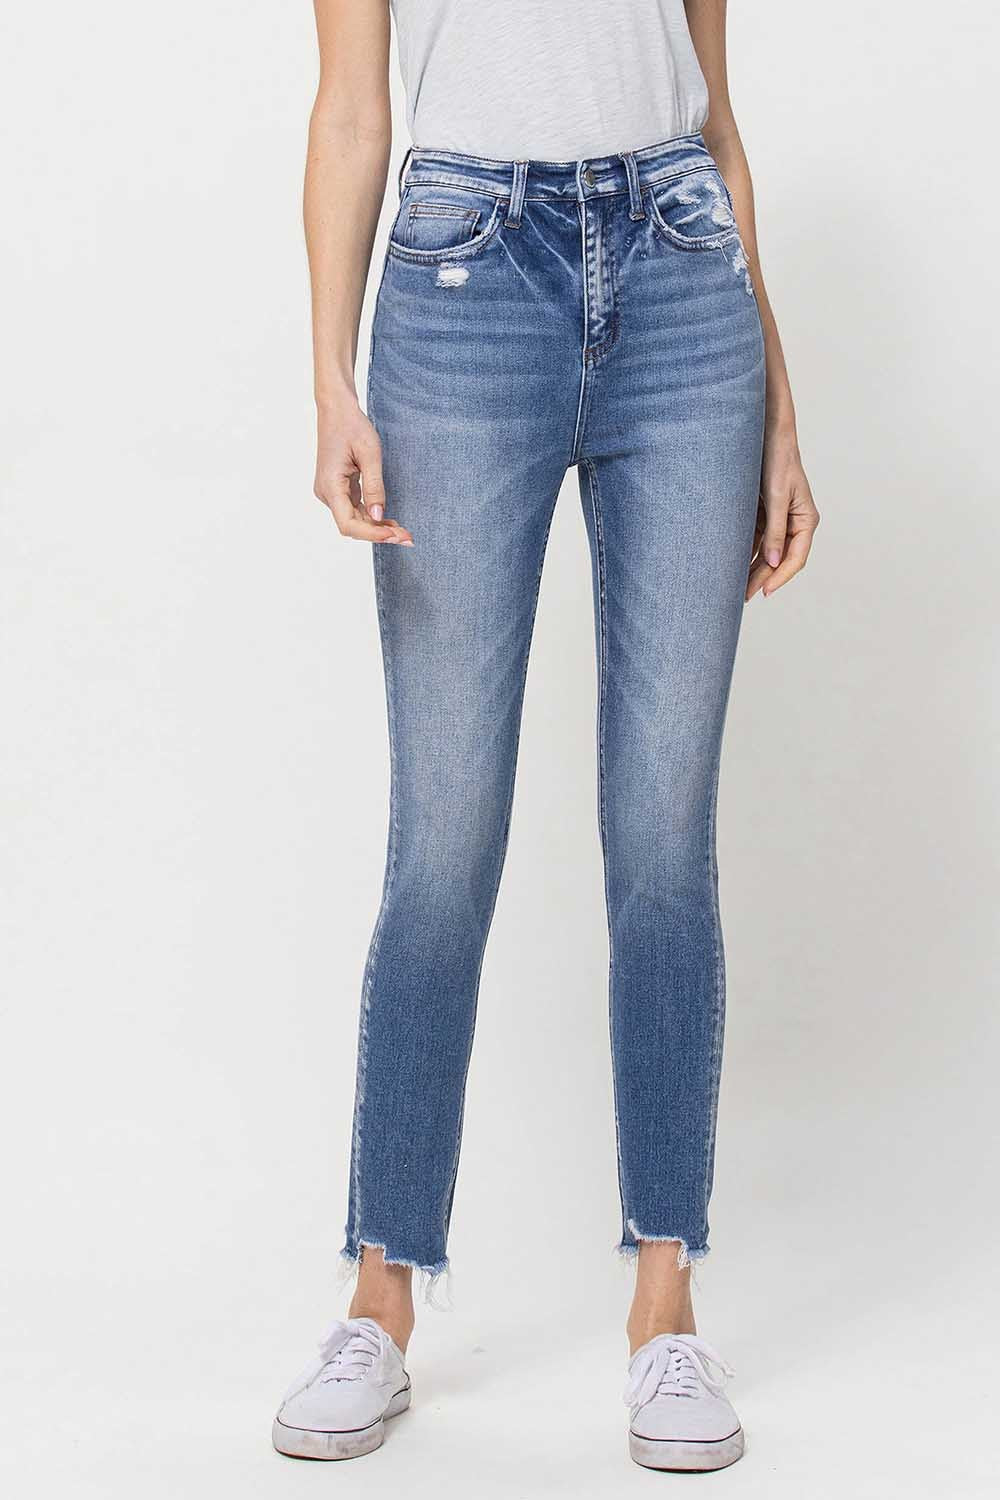 Orion High Rise Jeans by Flying Monkey